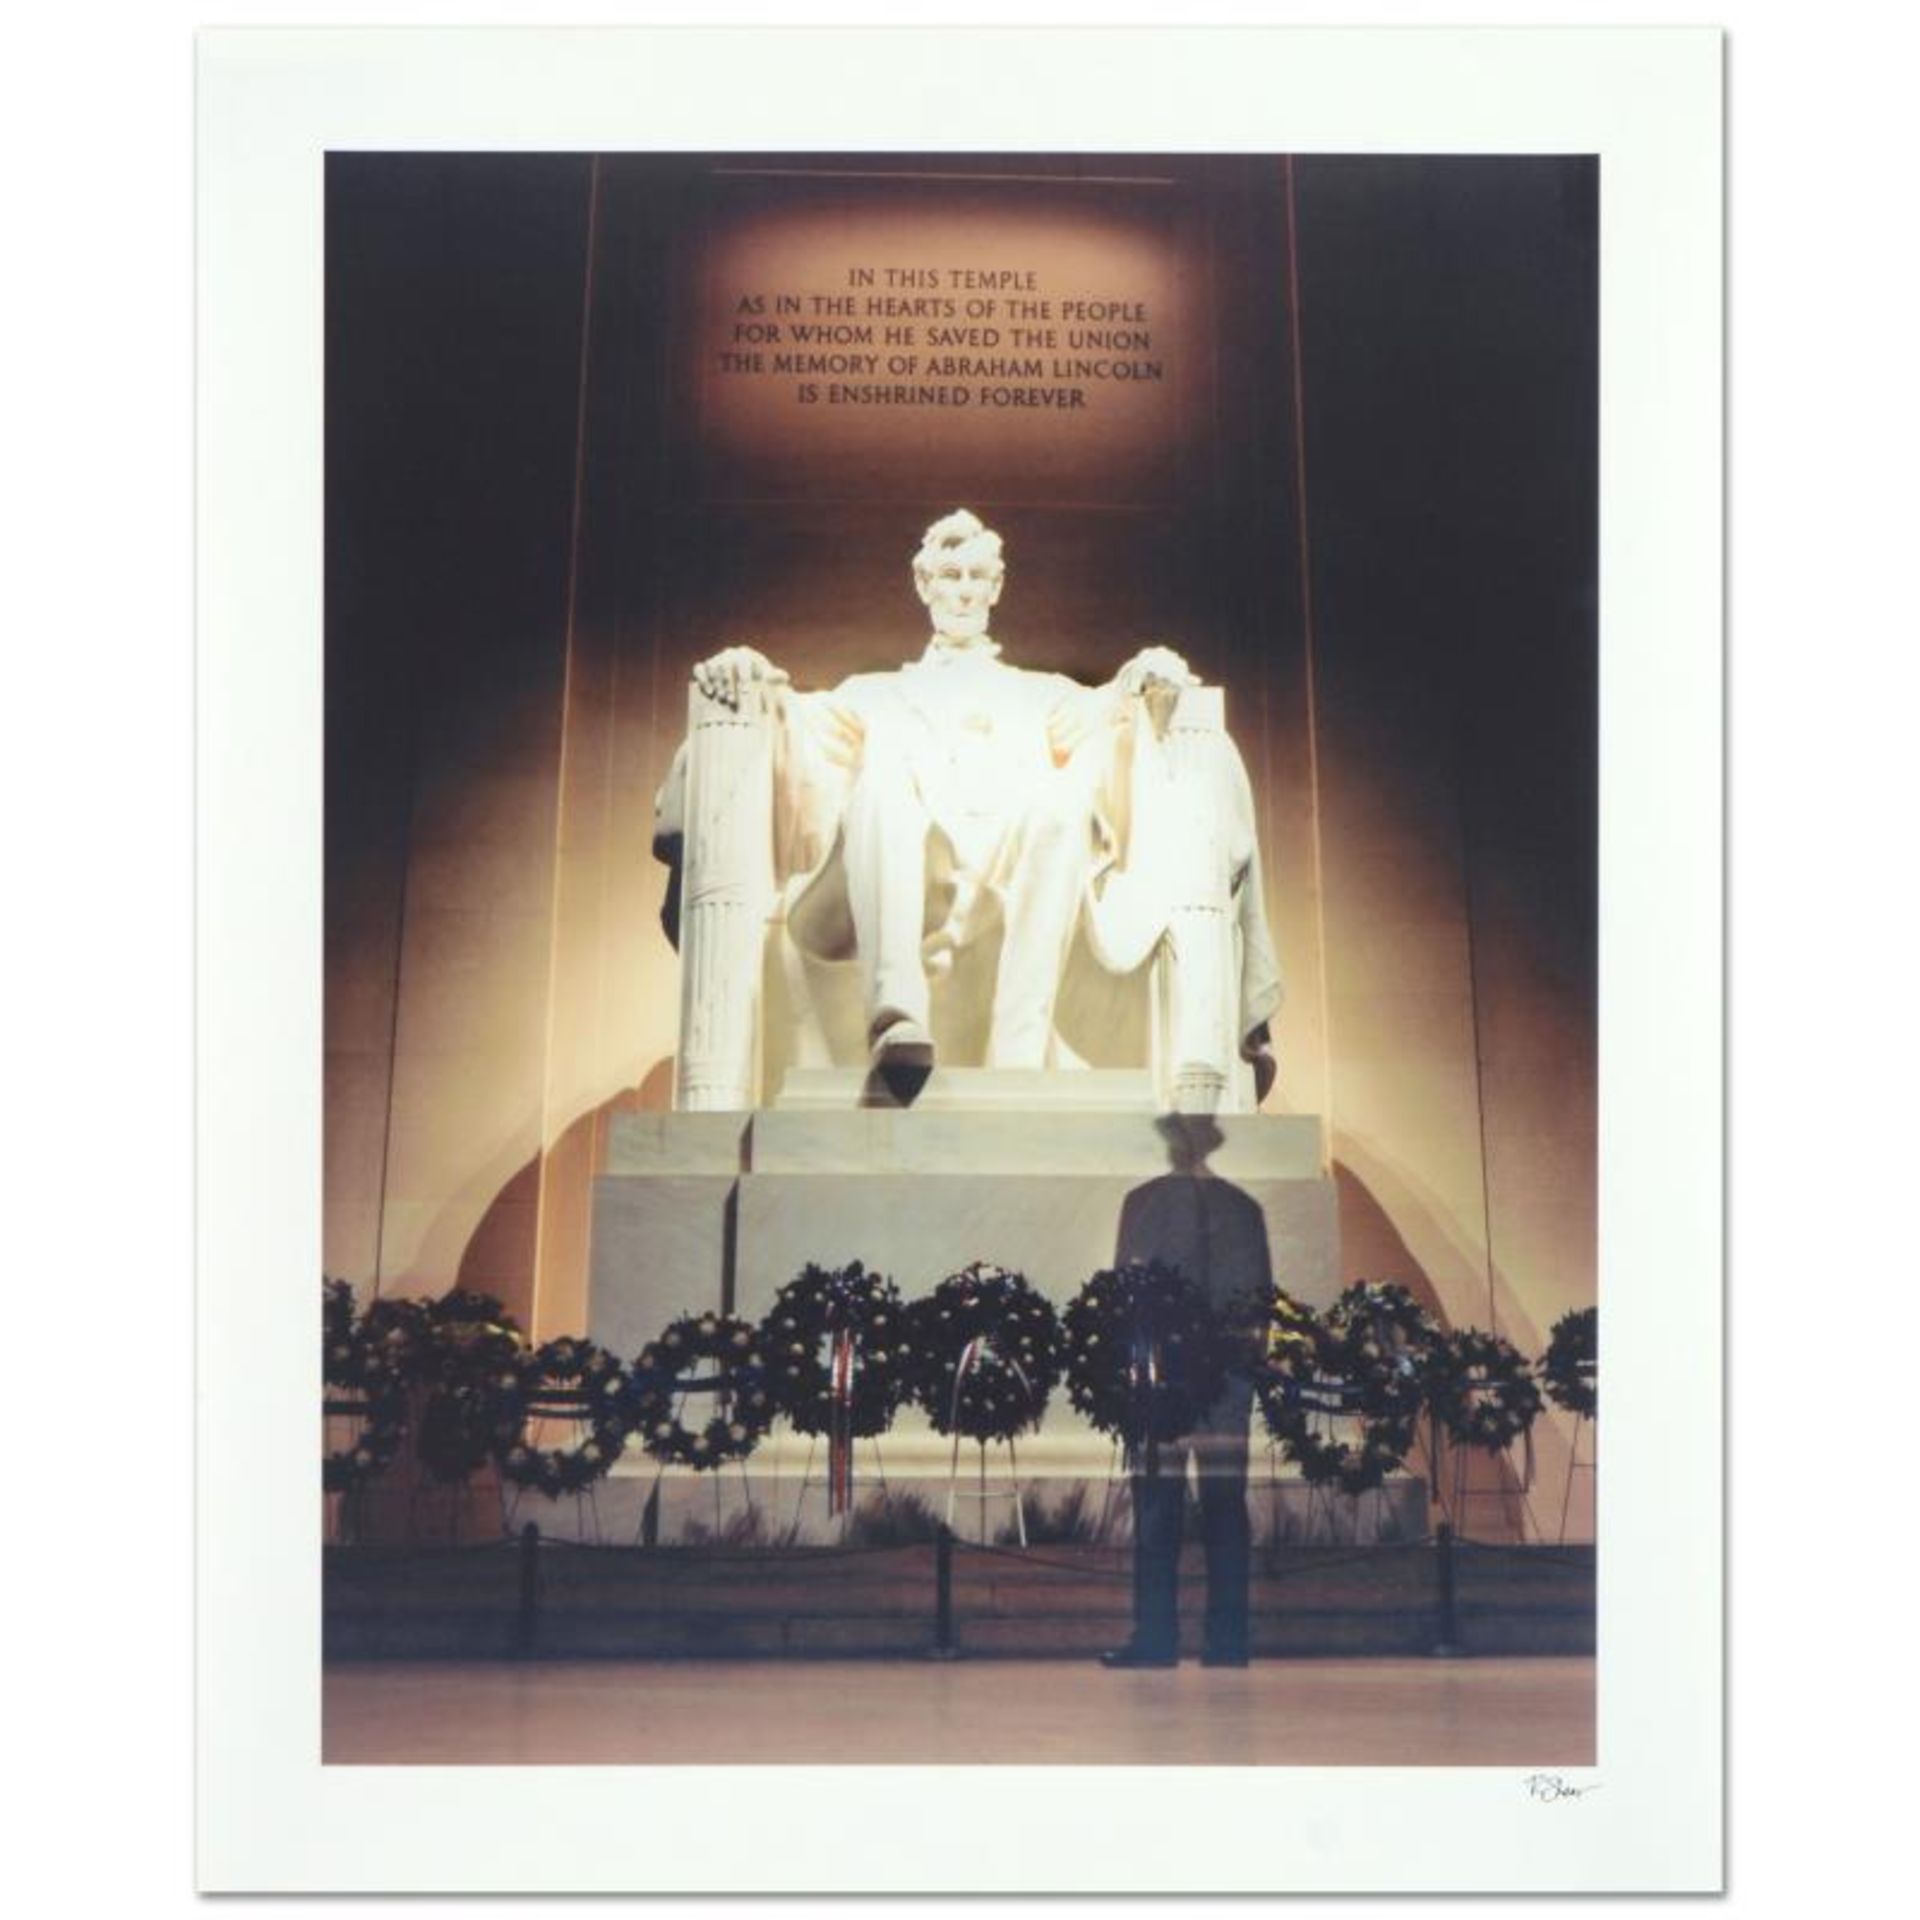 Robert Sheer, "Young Mr. Lincoln" Limited Edition Single Exposure Photograph, Nu